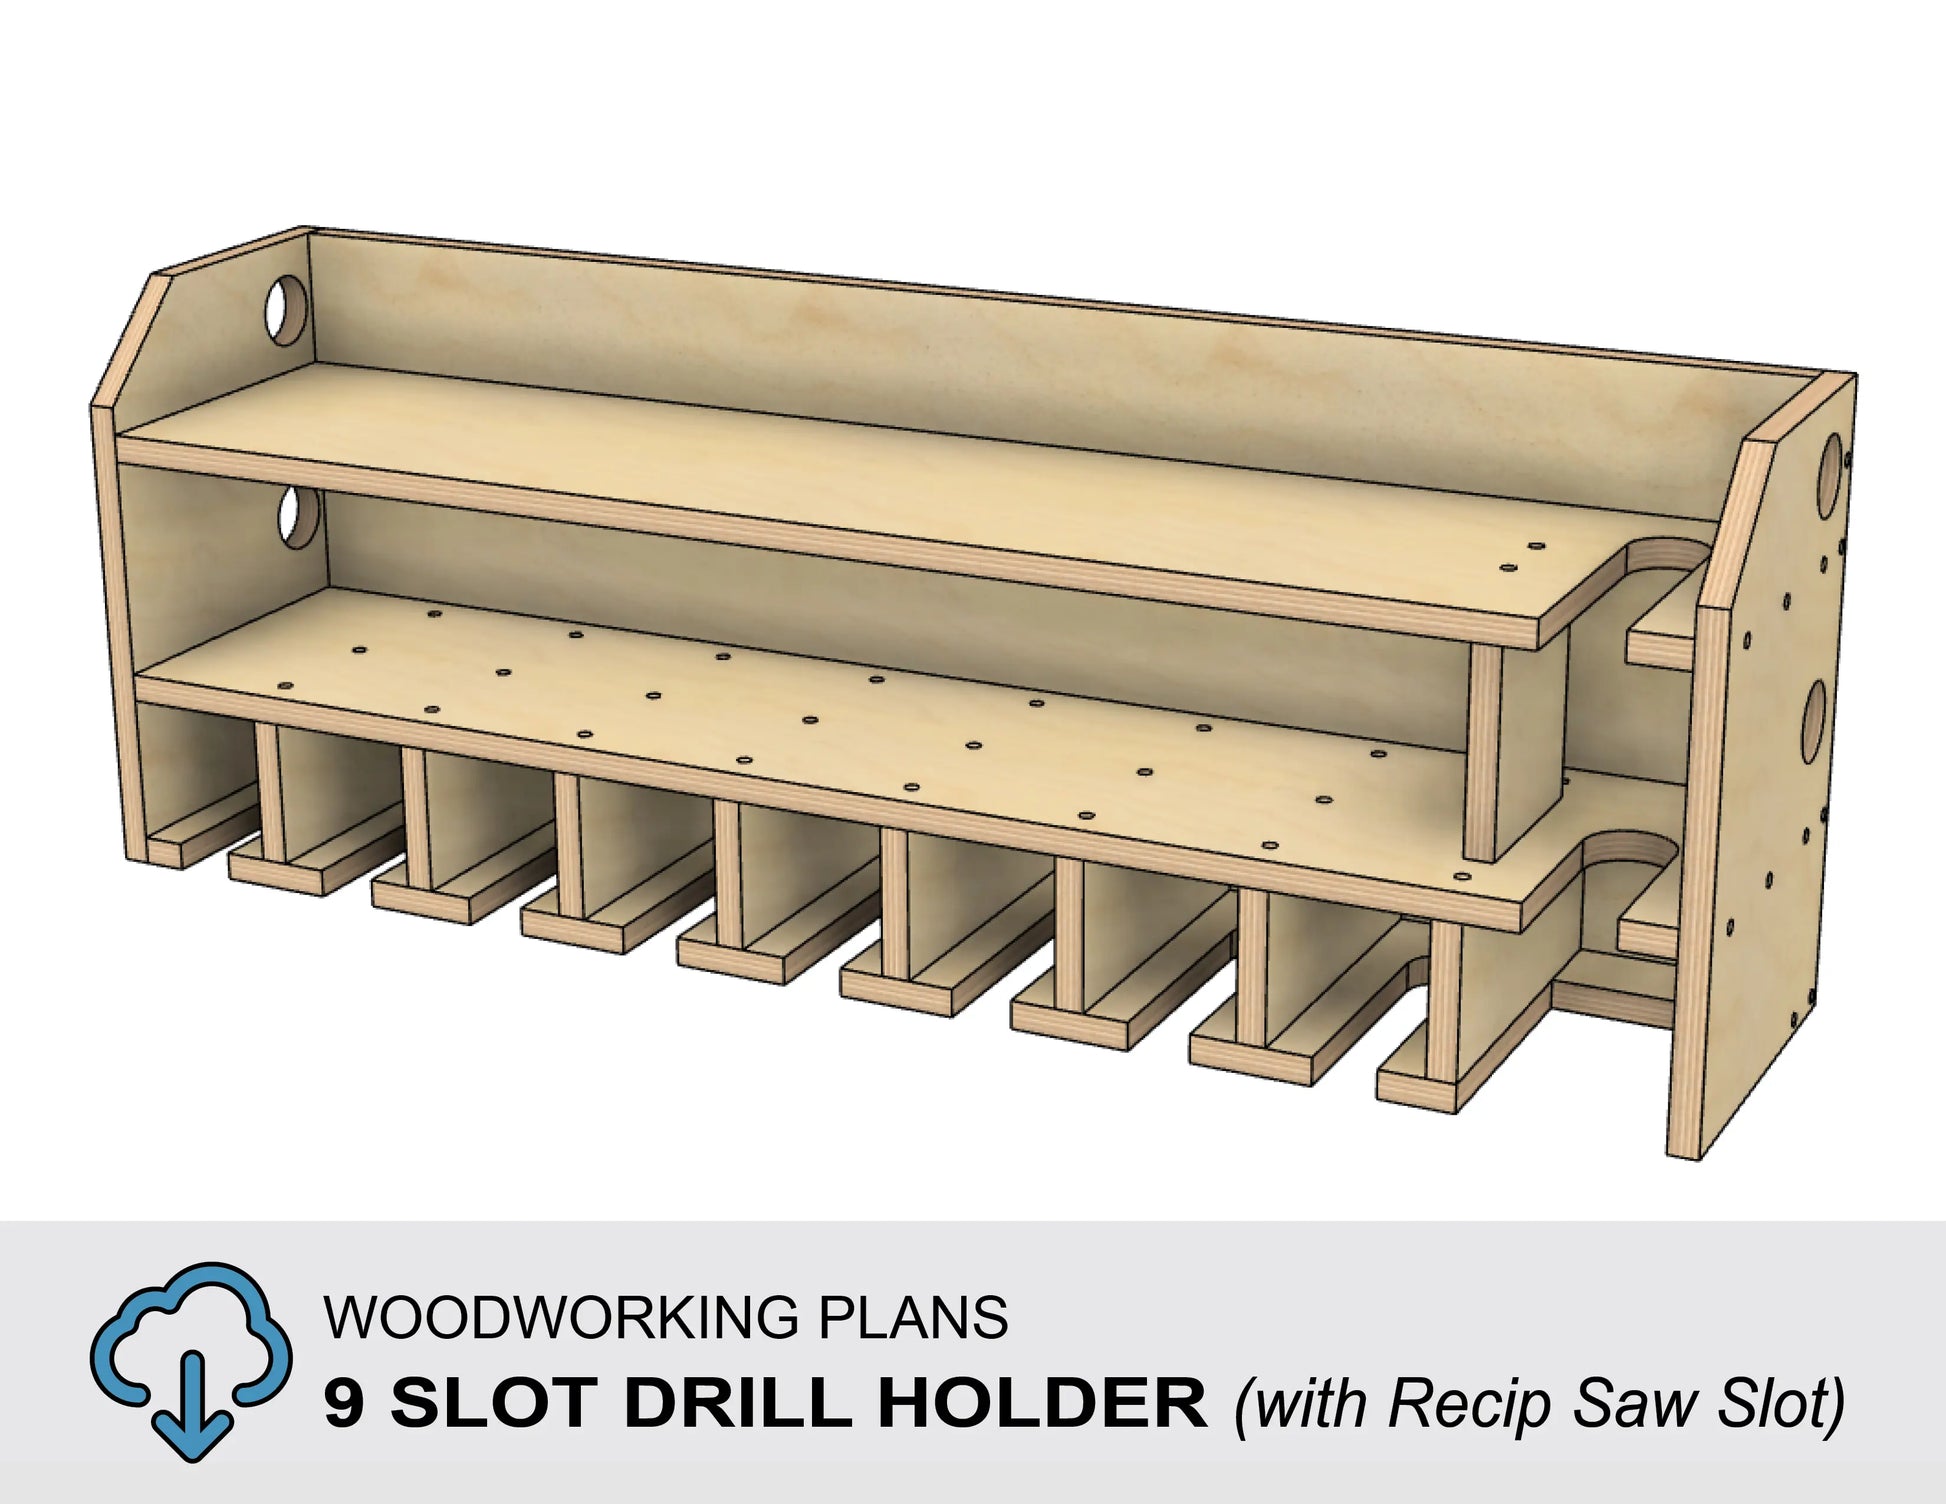 DIY cordless power tool storage rack plans for storing power tools in a cabinet mounted to a wall in a workshop